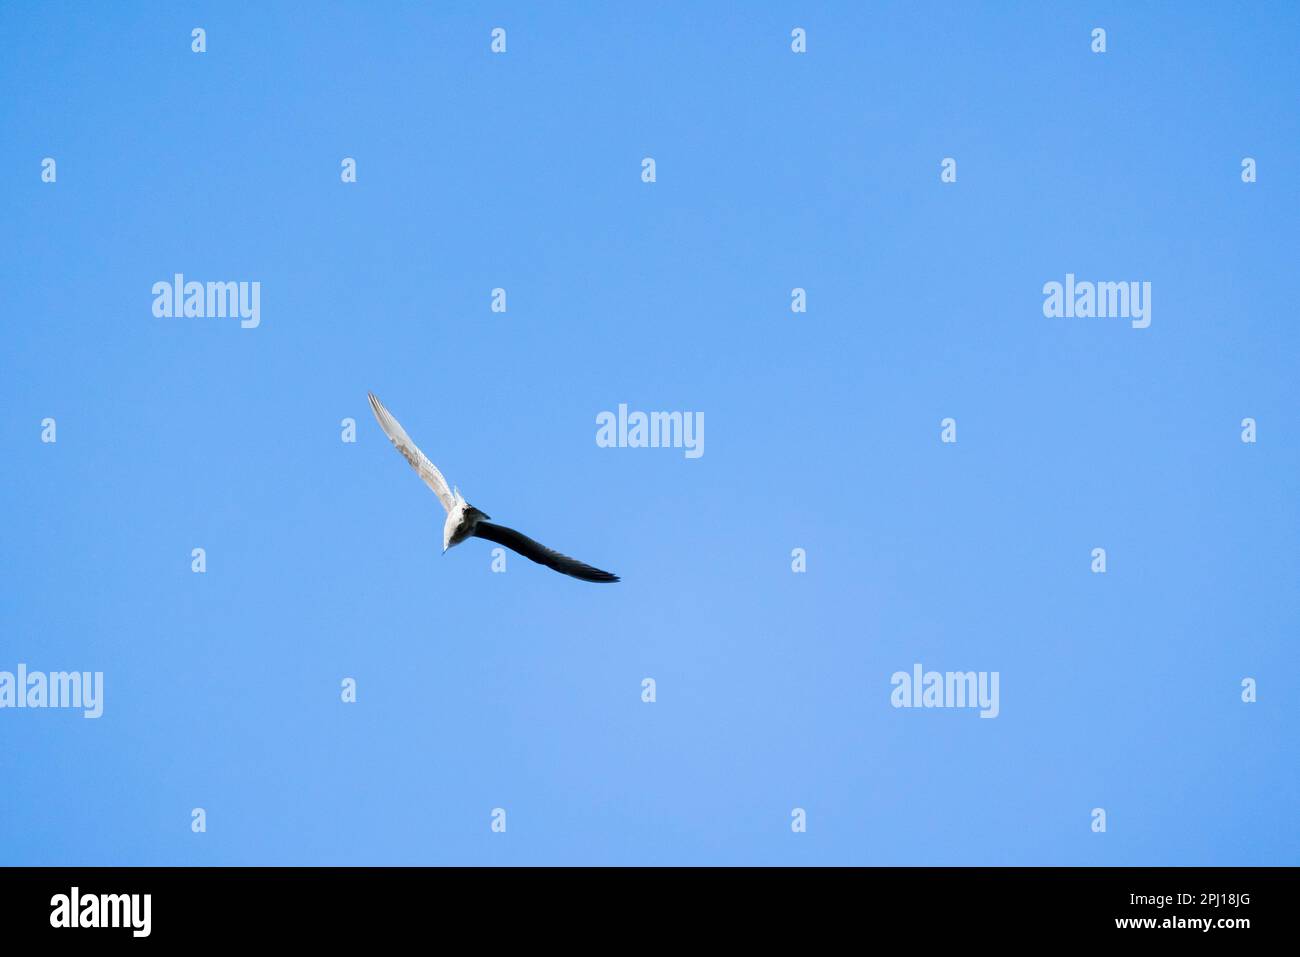 A seagull flies in clear blue sky, rear view, natural photo Stock Photo